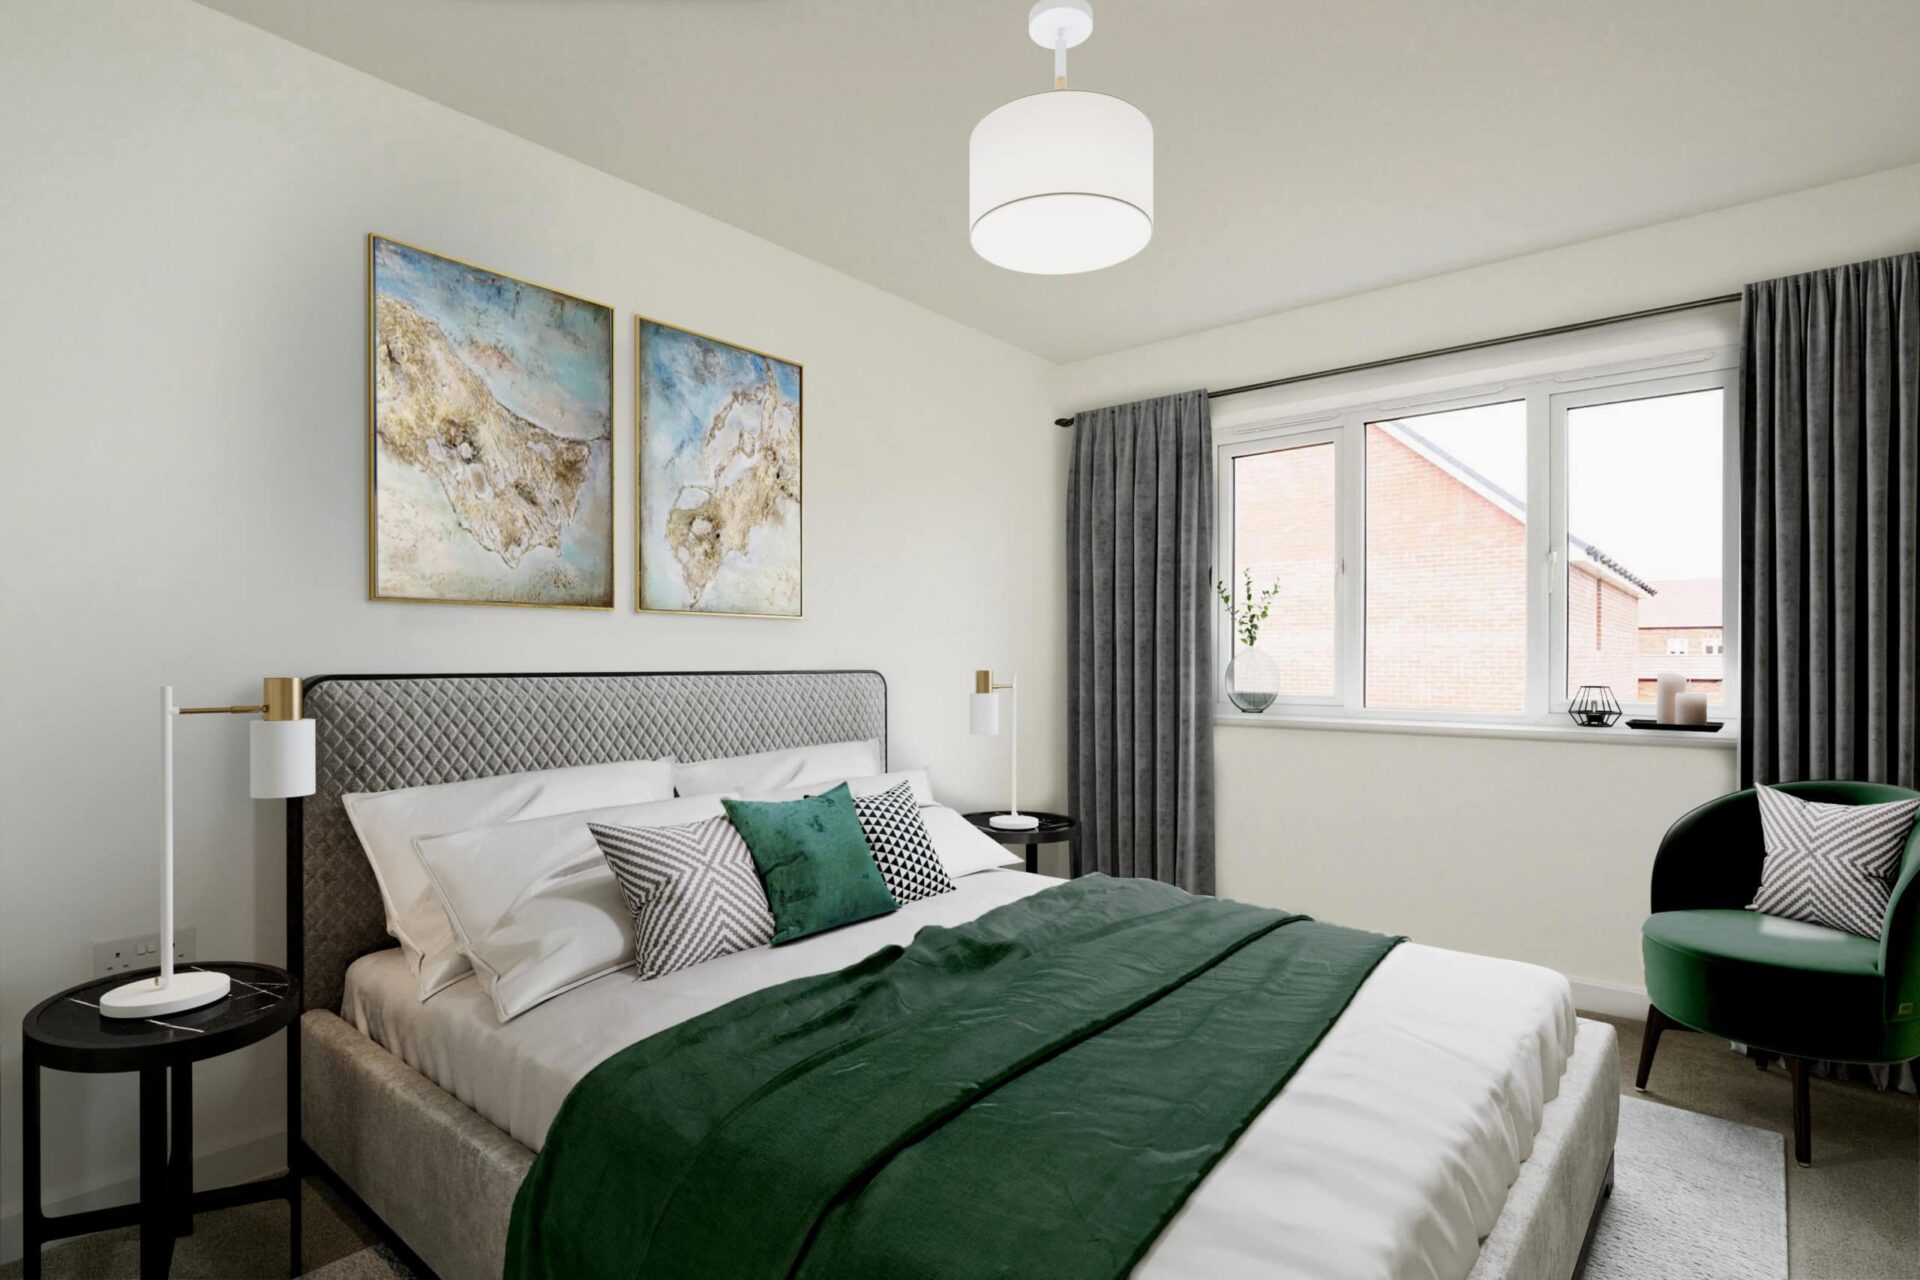 Photo of the bedroom image is a CGI Dressed representation taken in an actual home at Edwalton Park.